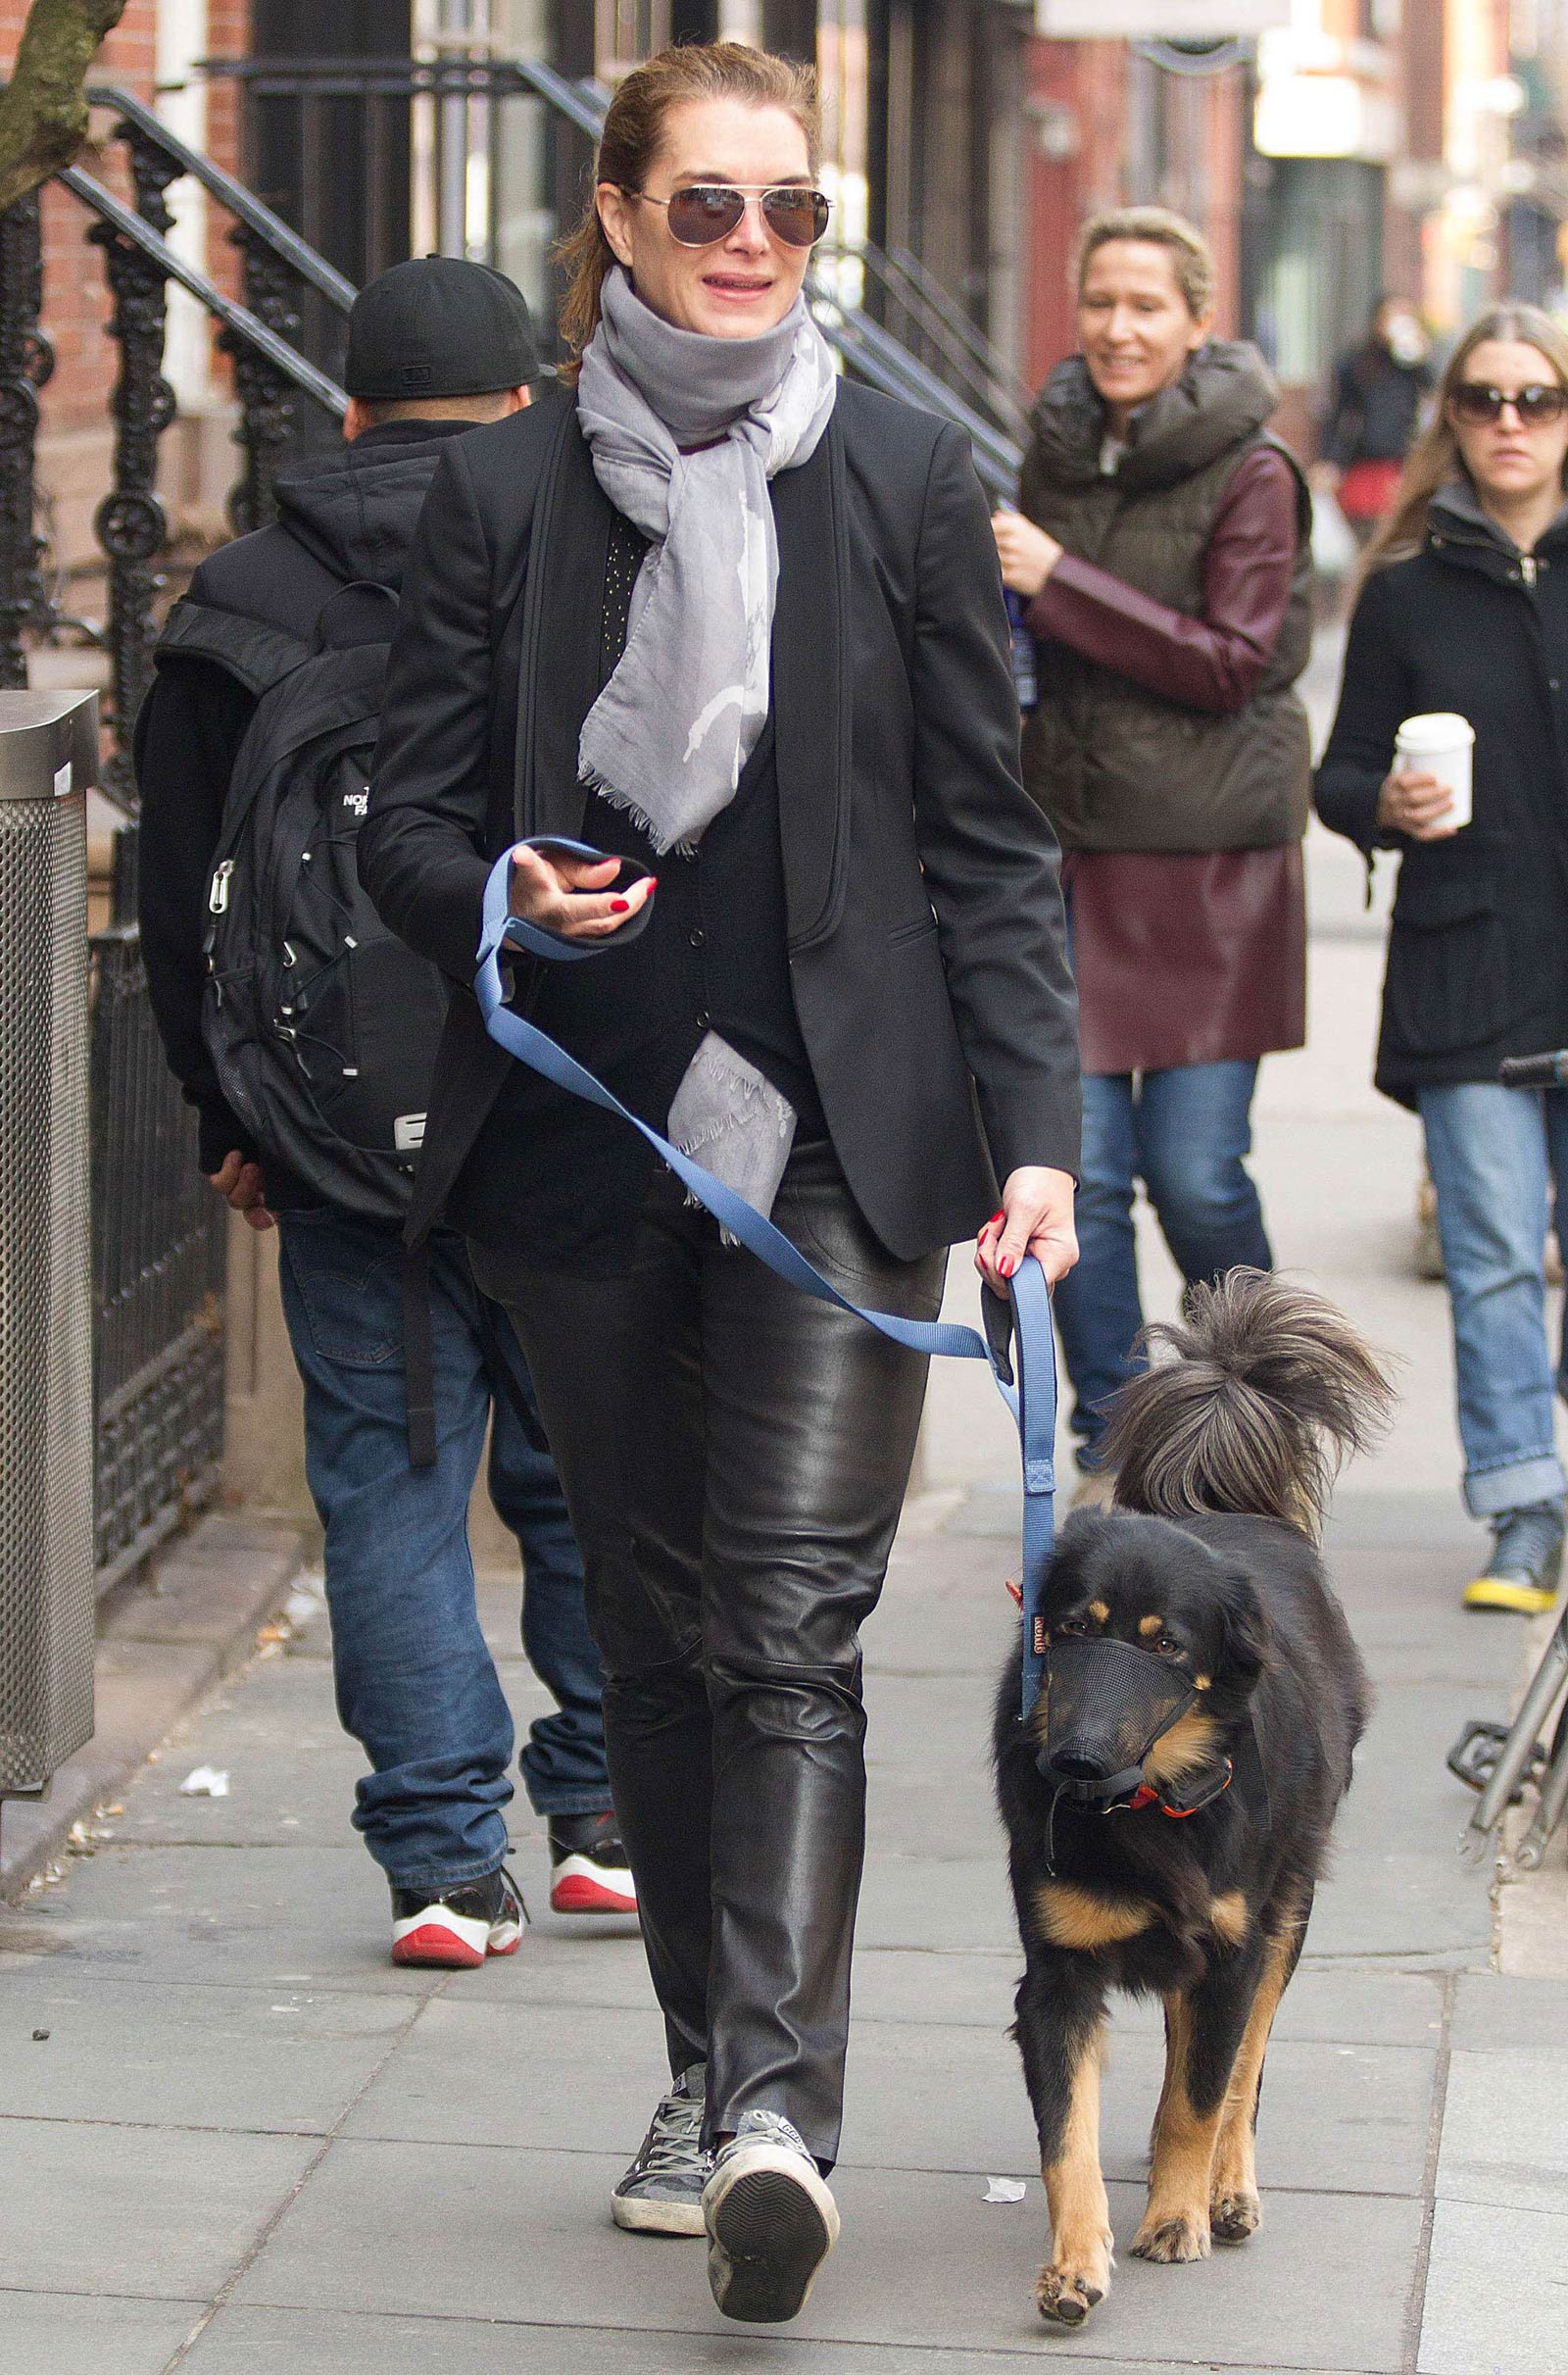 Brooke Shields taking a stroll with her pet dog